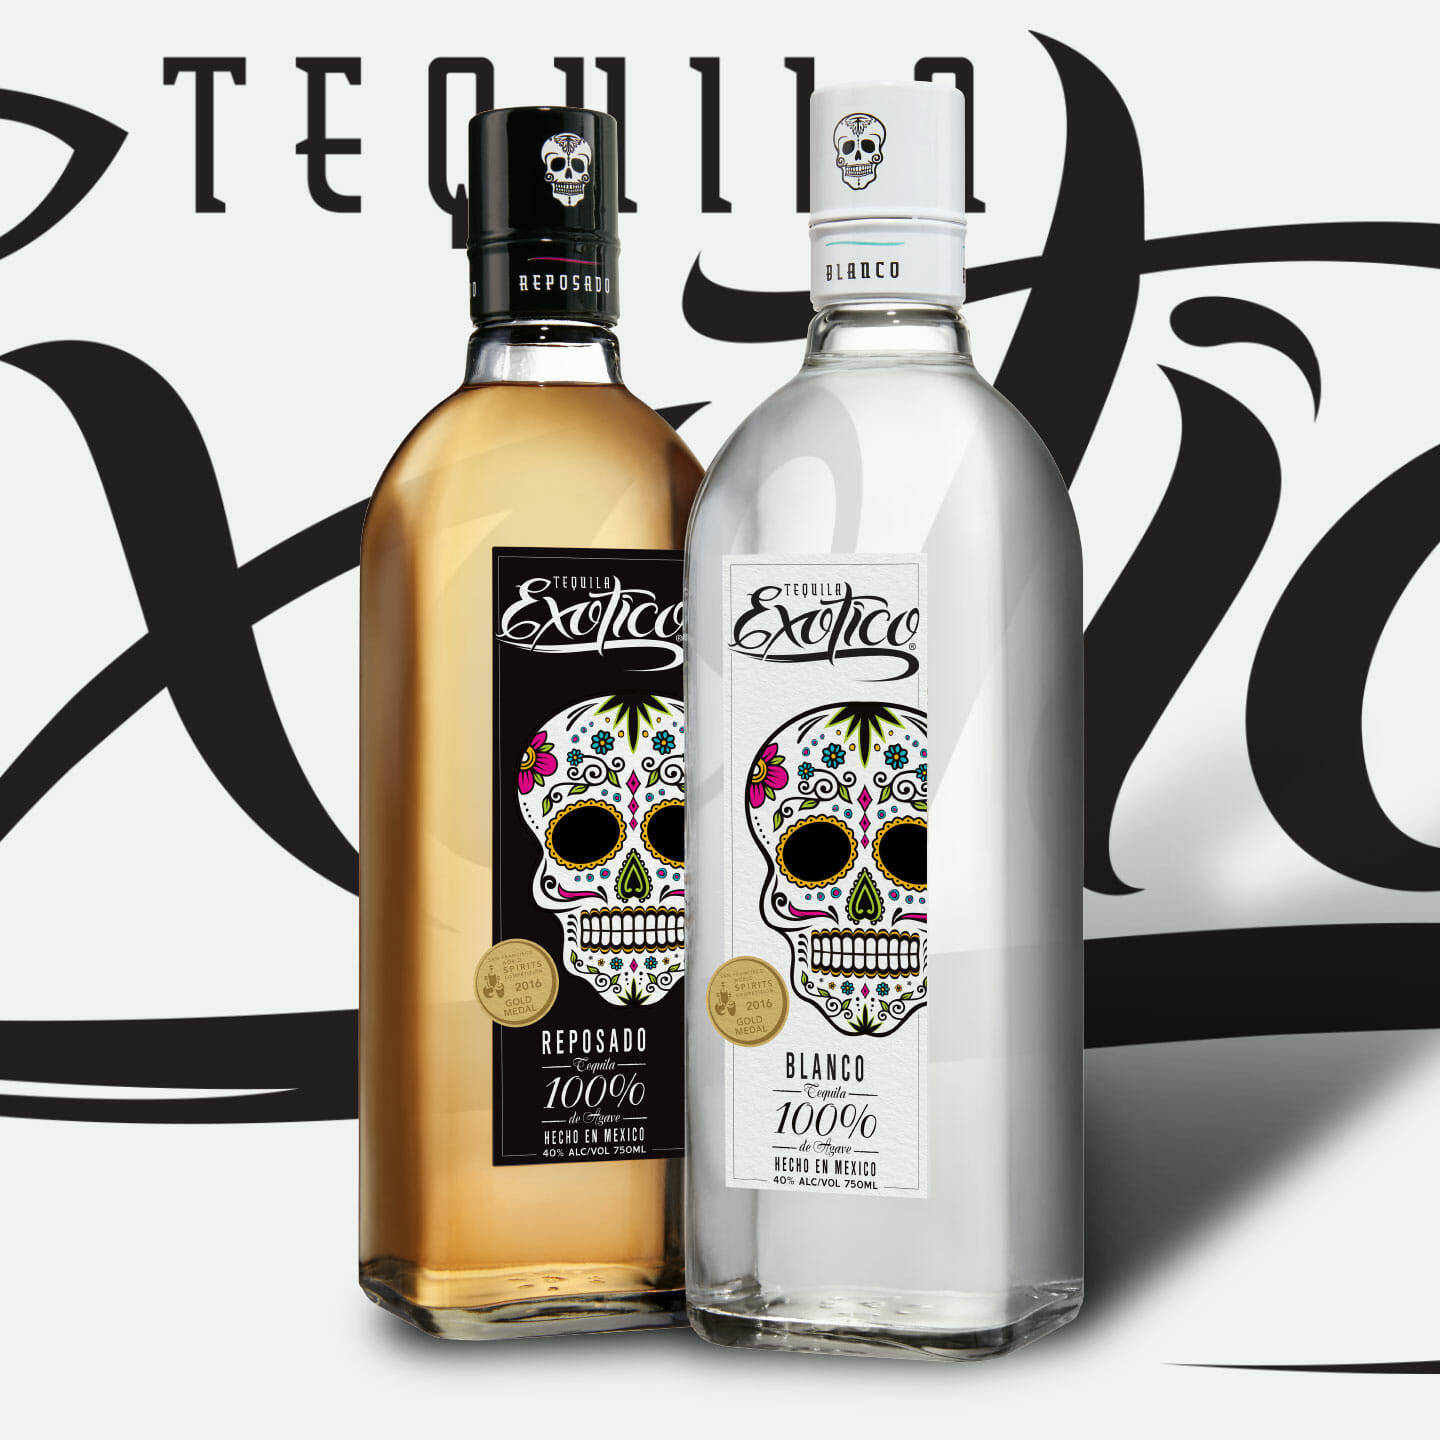 Exotico Tequila Graphic Art Poster Wallpaper